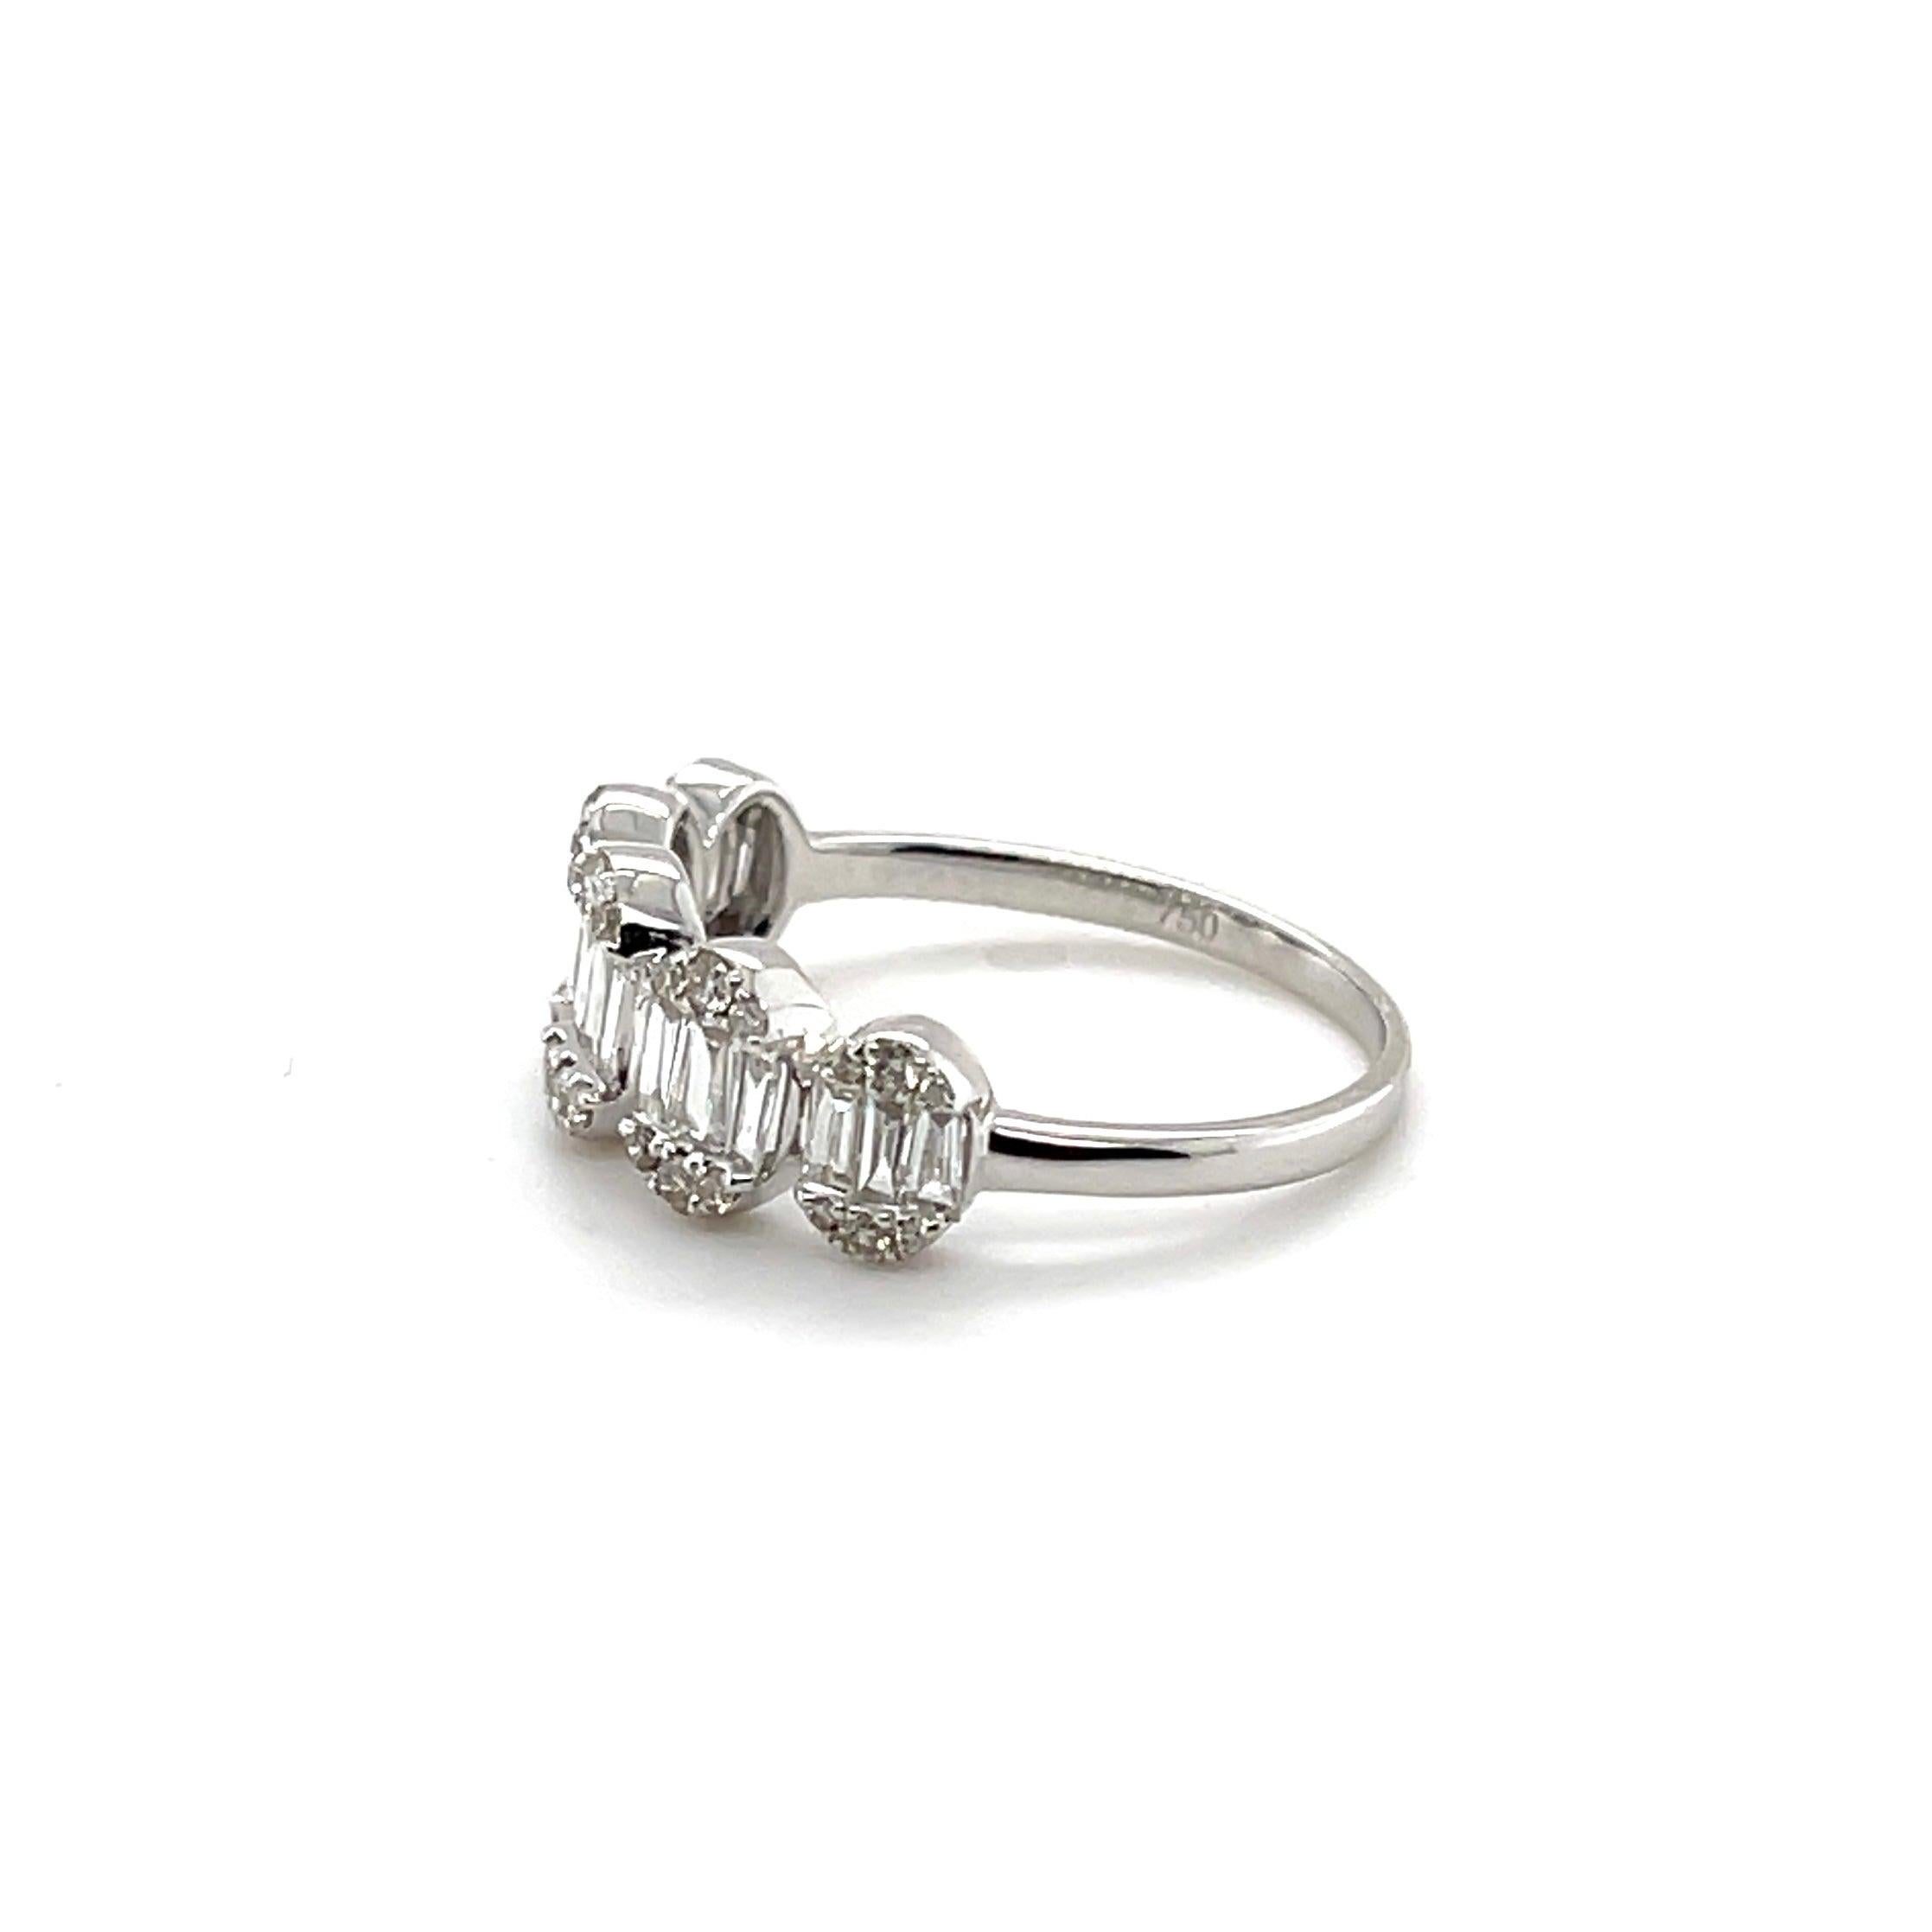 Diamonds, crafted with eighteen karat white gold, complemented by a beautiful polished finish design.

30 Round diamond weight: 0.18CT

15 Tapered diamond baguette weight: 0.29CT 

Item weight: 1.87G 

18KWG 

Complimentary resizing upon purchase!